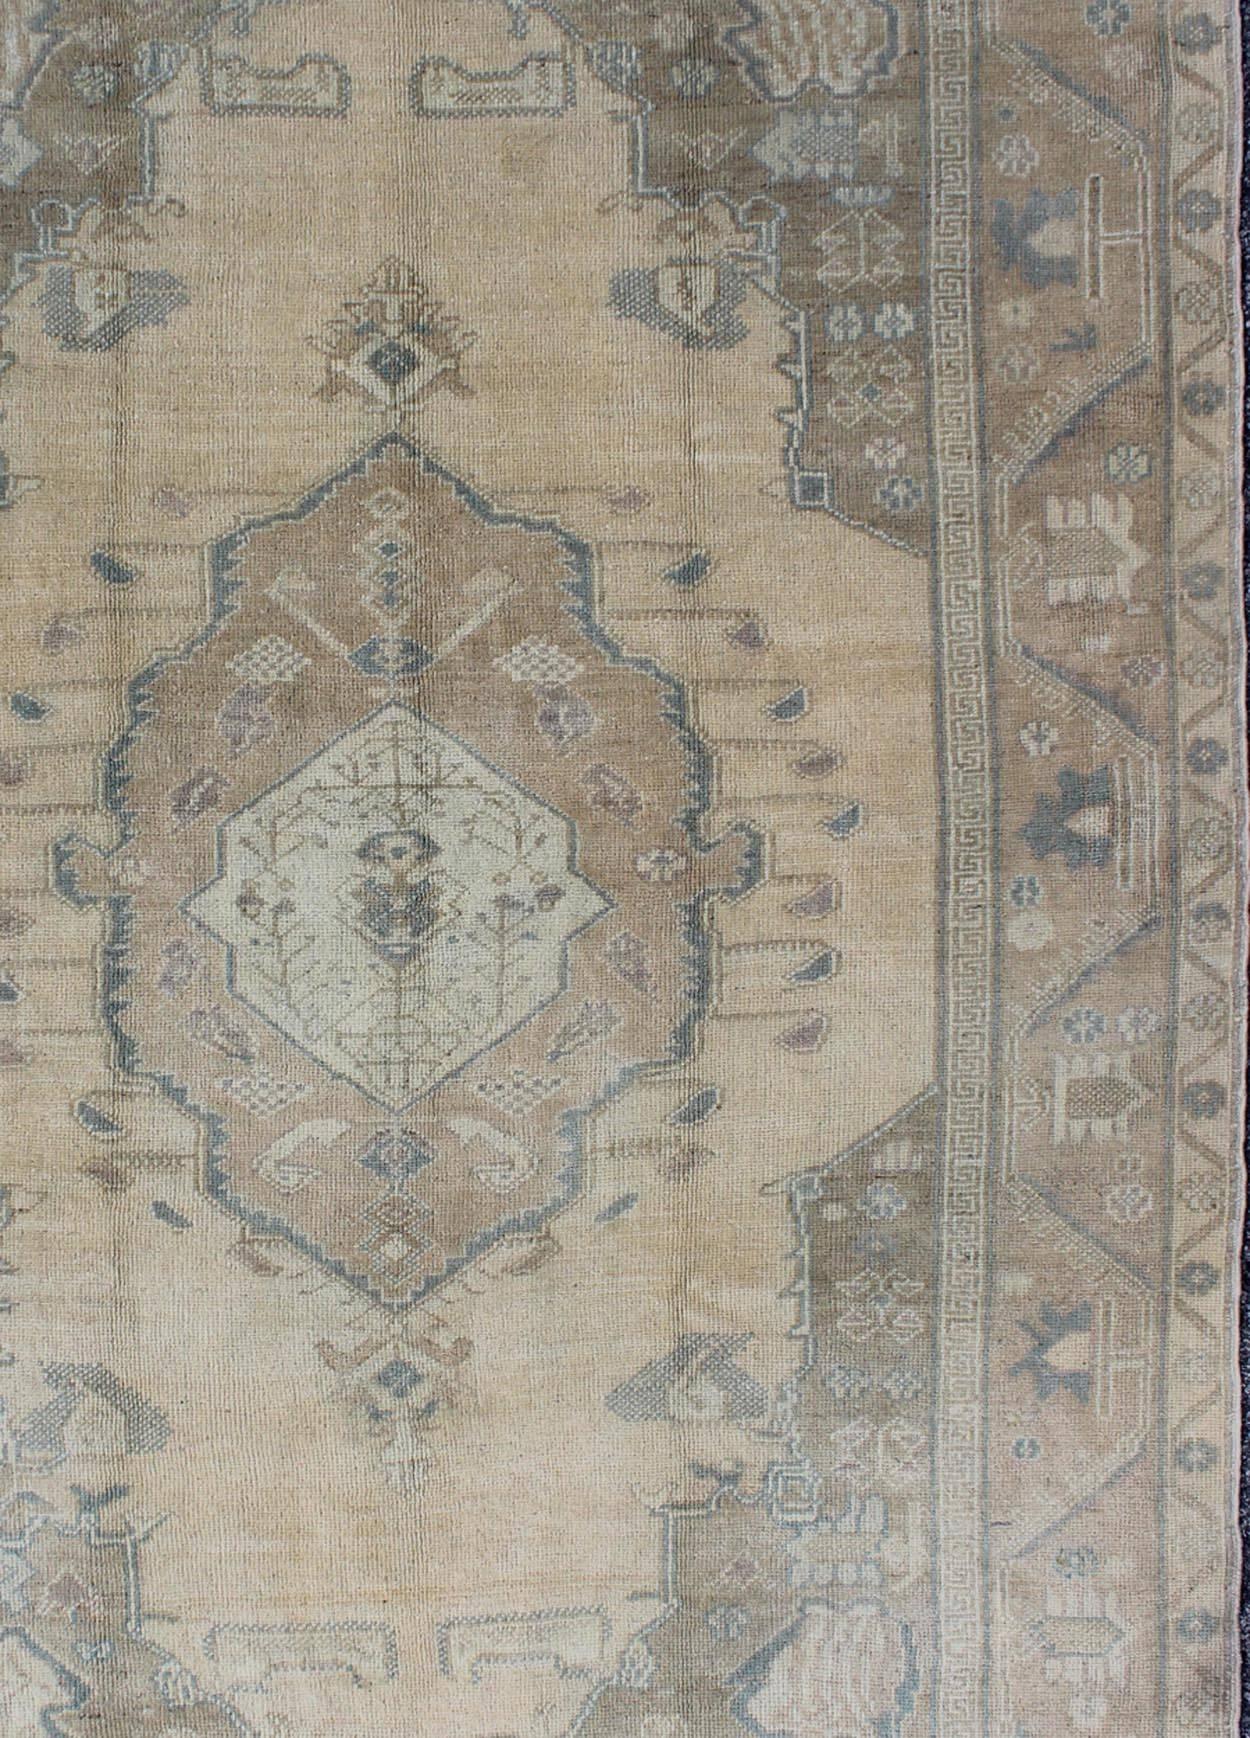 Vintage Turkish Oushak Rug with Tribal Medallion in Ivory, Camel, and Gray In Excellent Condition For Sale In Atlanta, GA